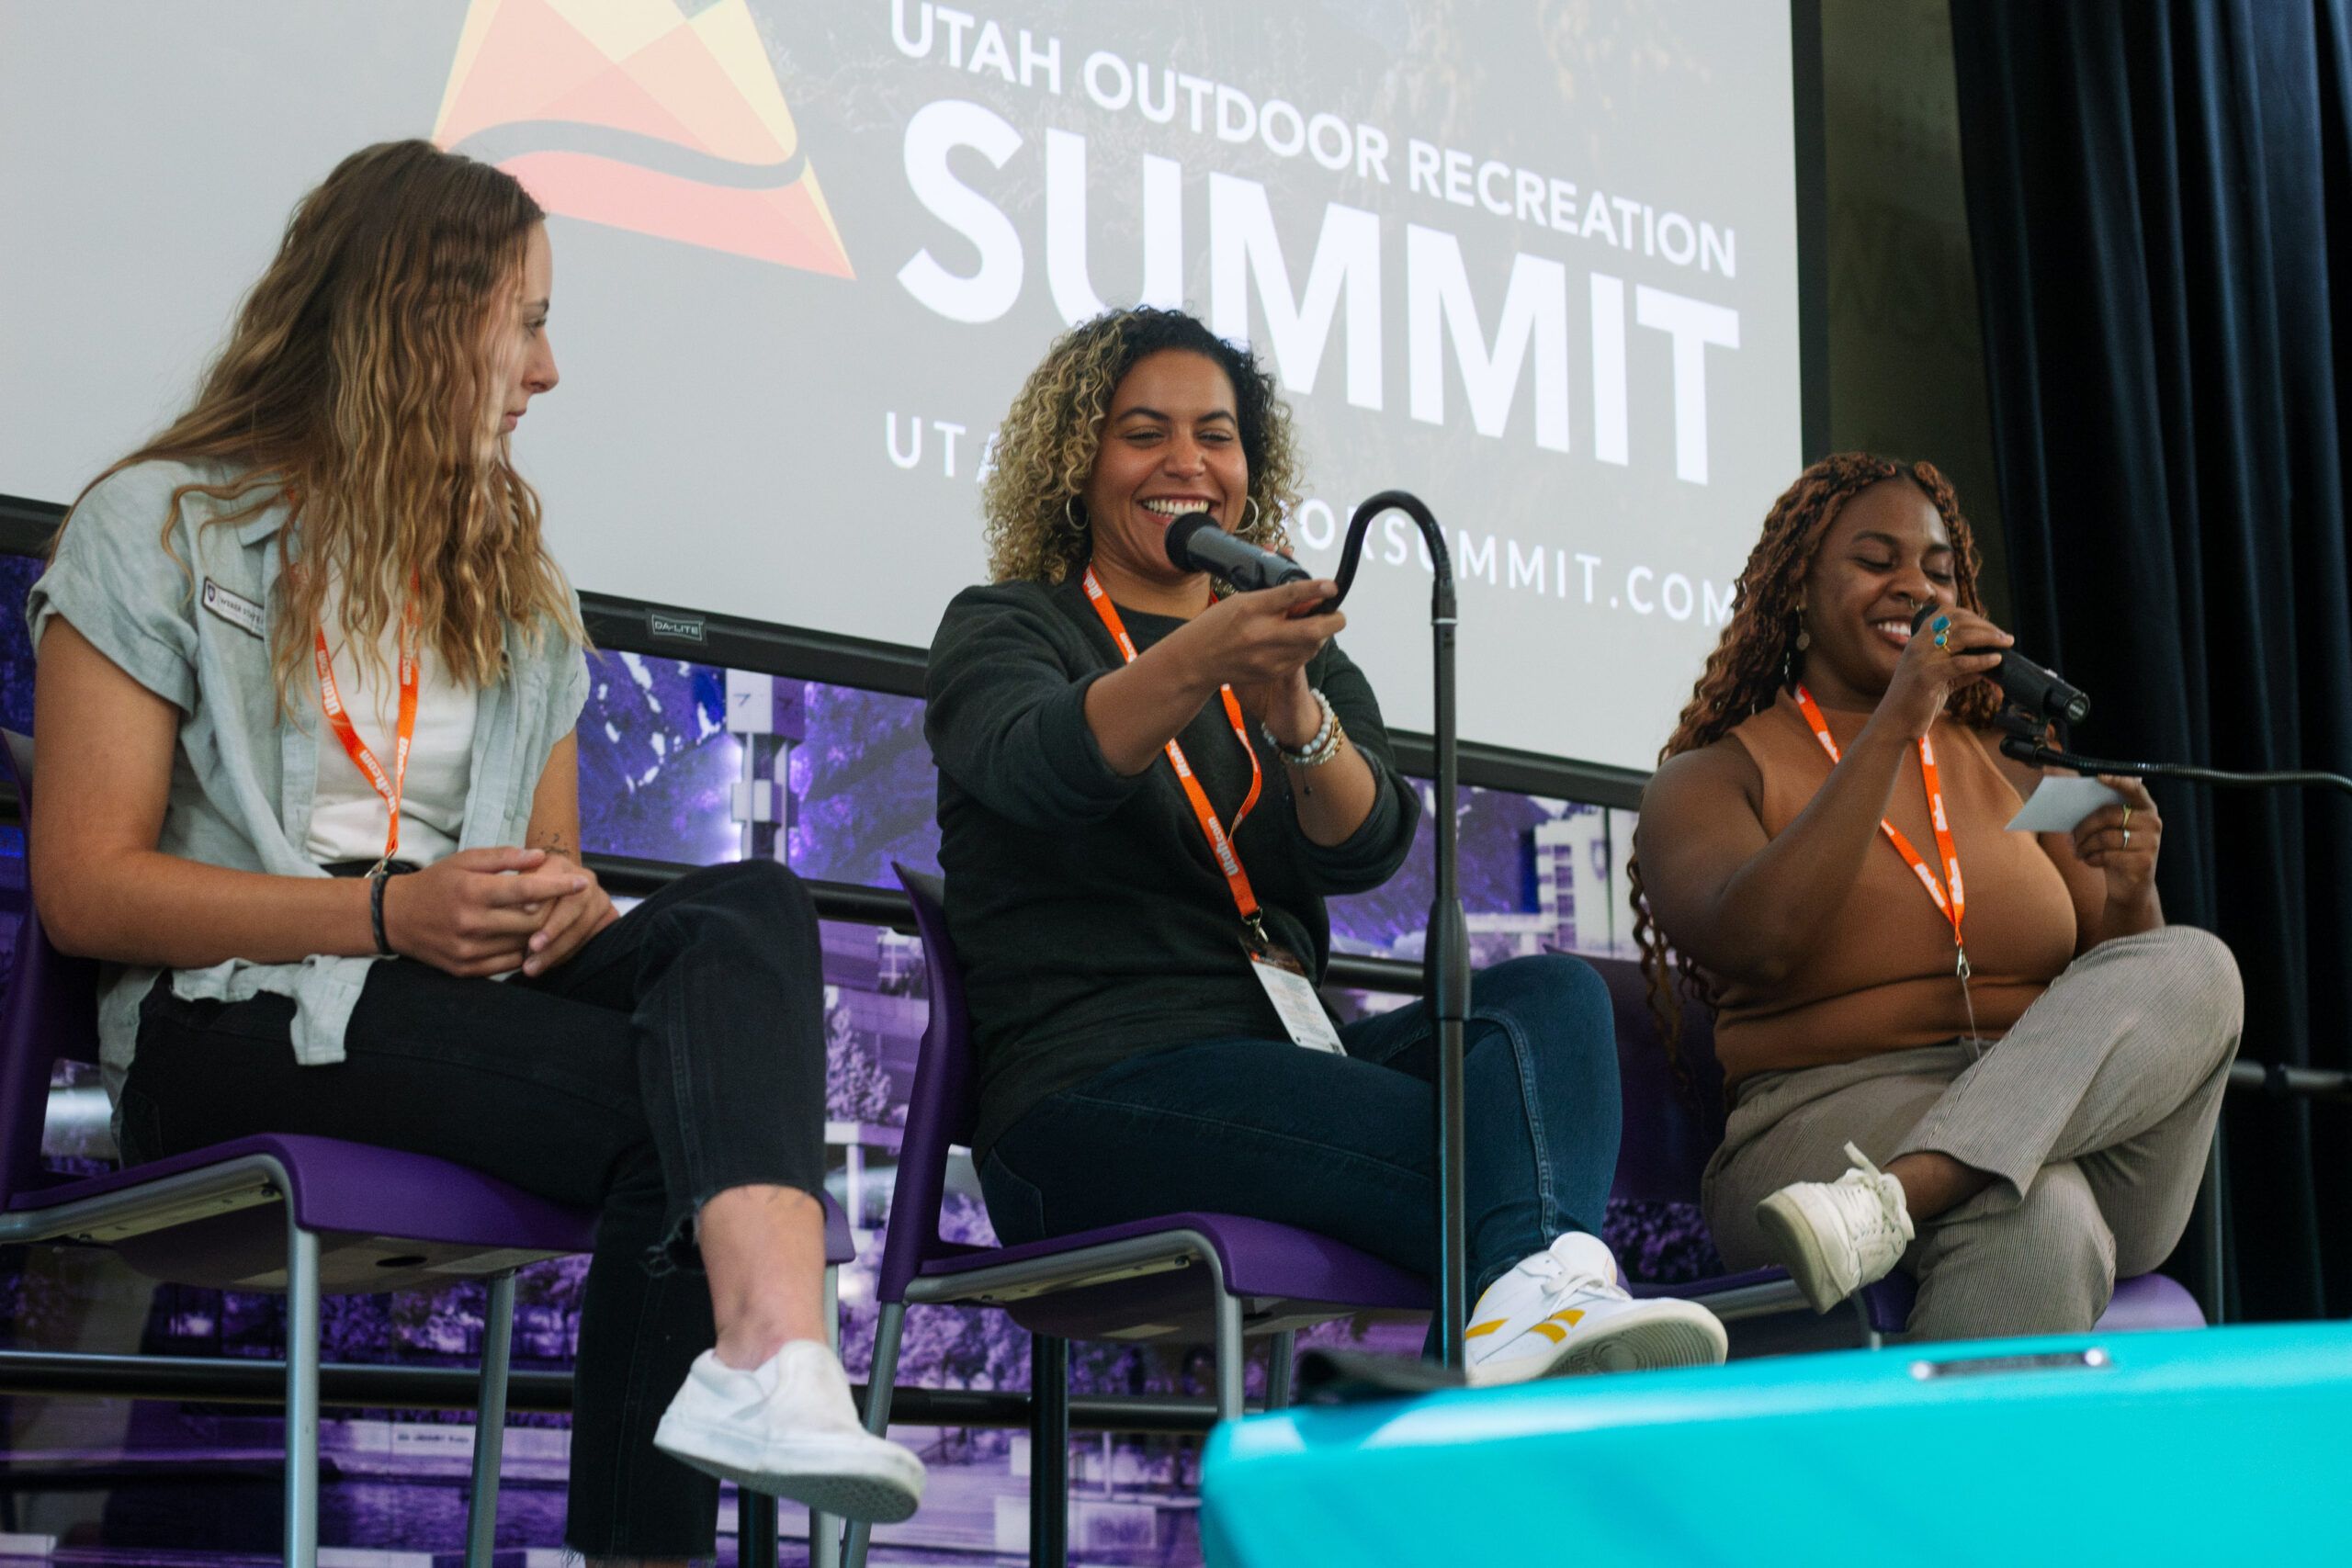 The annual Utah Outdoor Recreation Summit cements the state as a global leader in outdoor recreation.